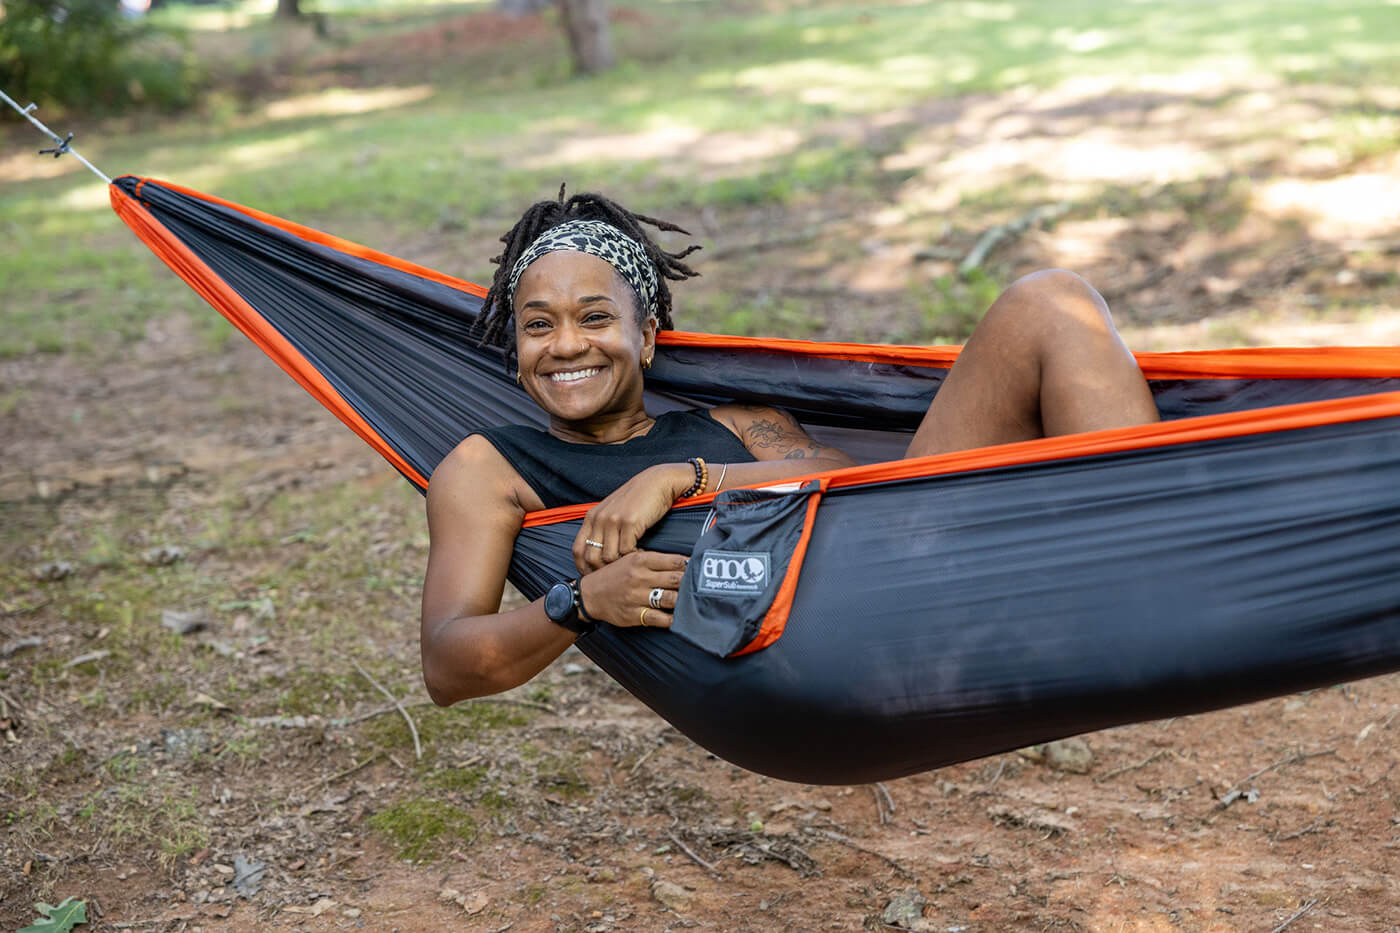 A woman lays in her ENO SuperSub Ultralight Hammock while in the park